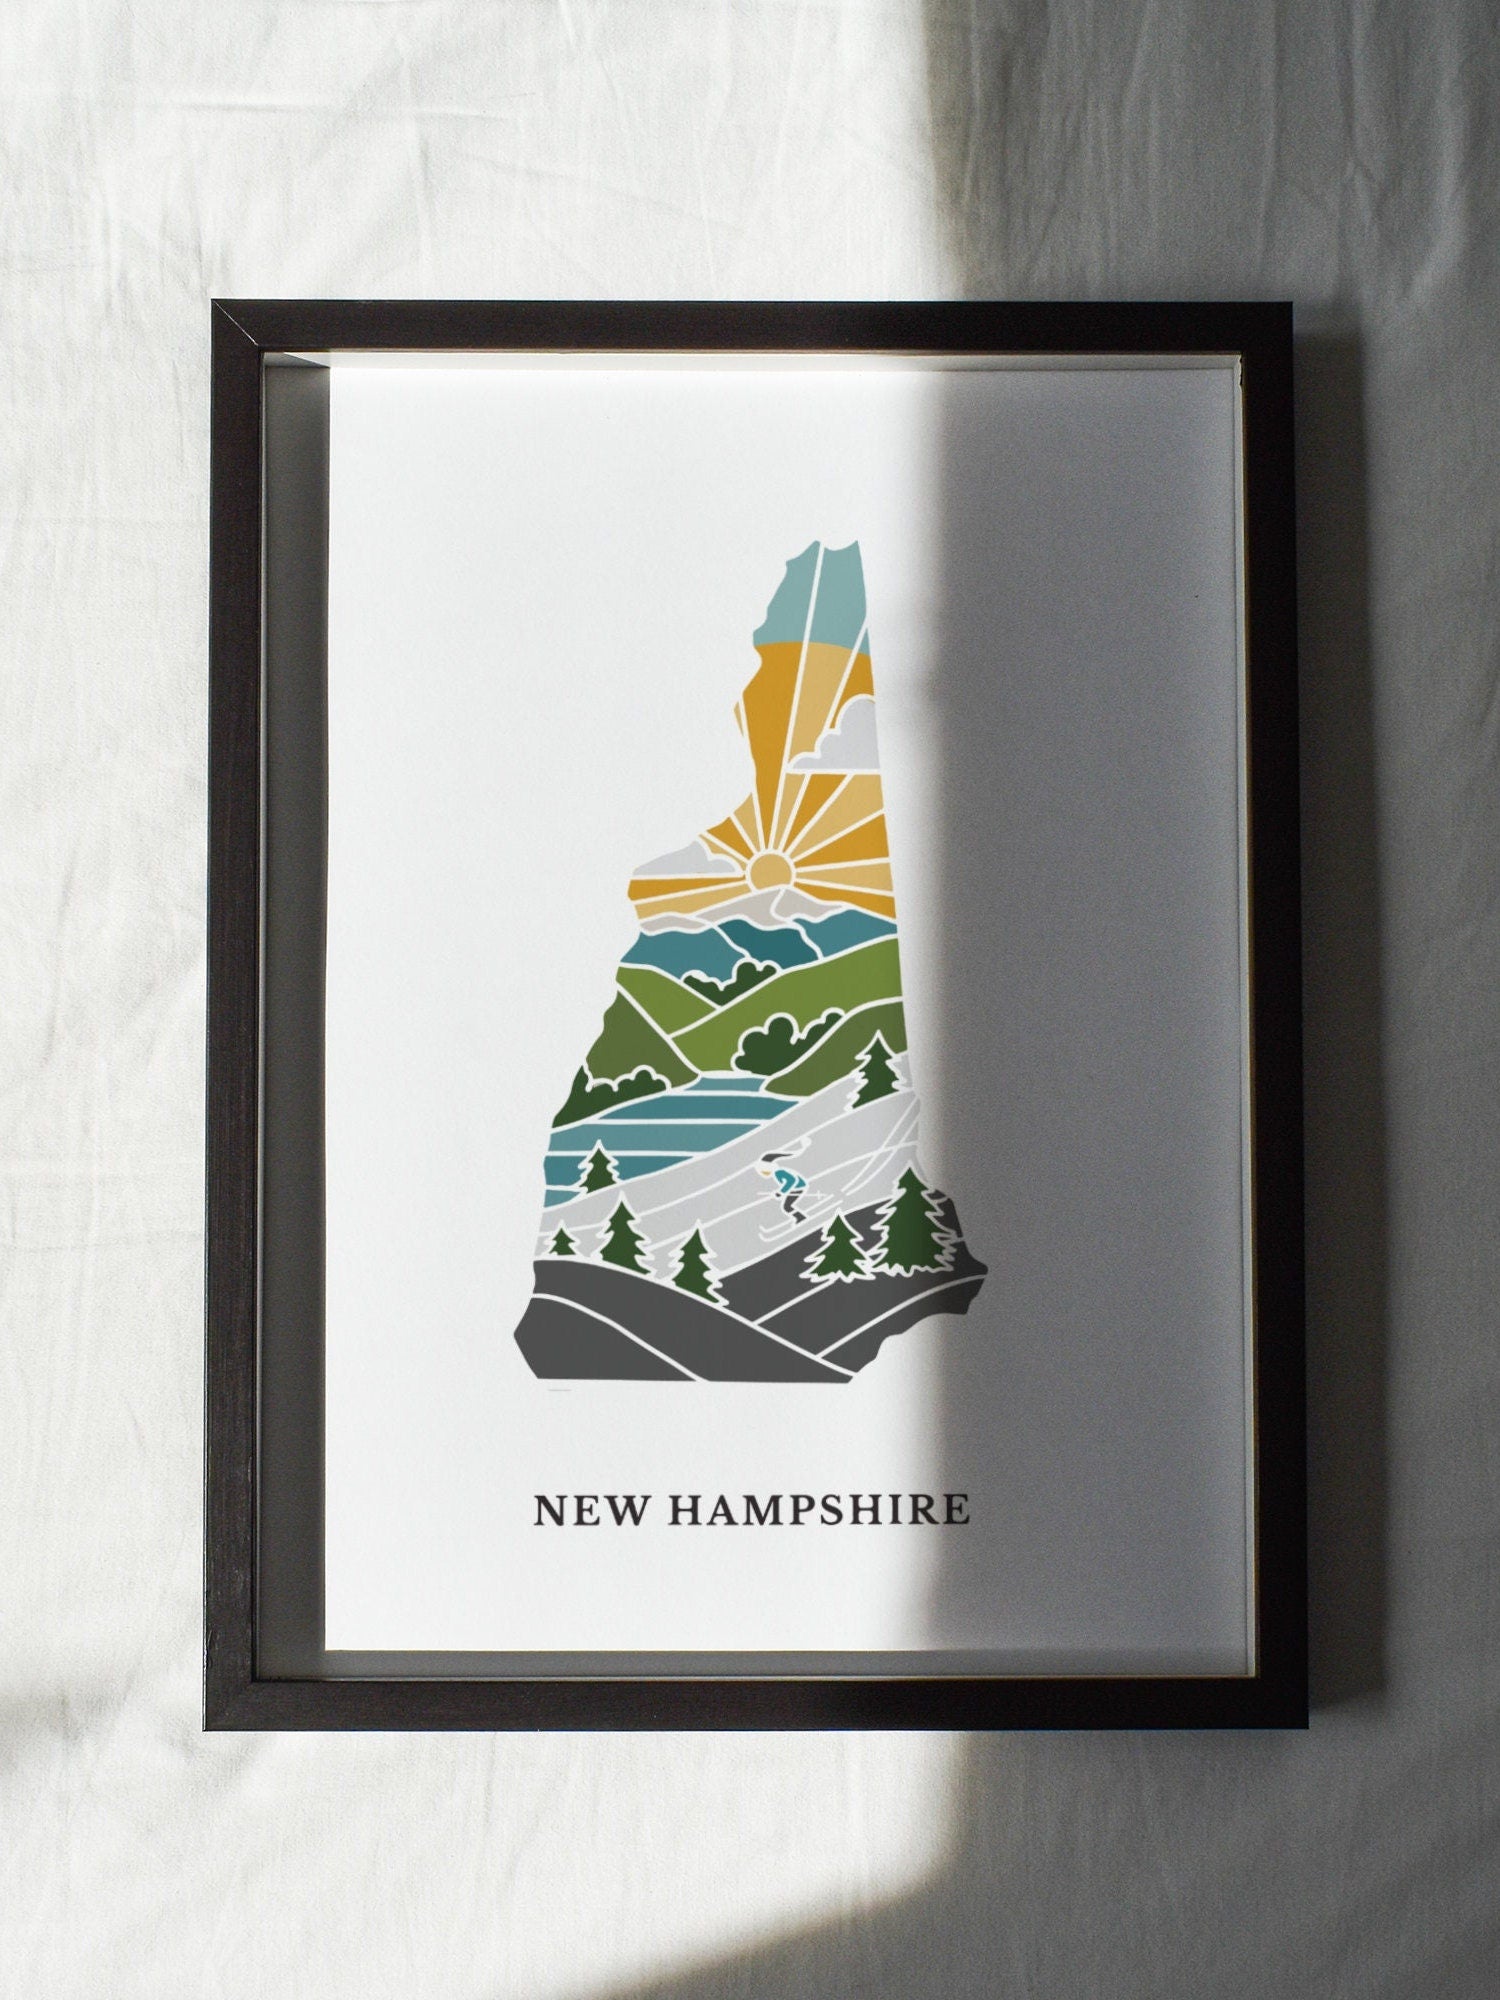 New Hampshire Physical Art Print | State Wall Art | 5x7, 8x10, 11x14, 16x20 Archival Art Print | New Hampshire Illustrated Poster